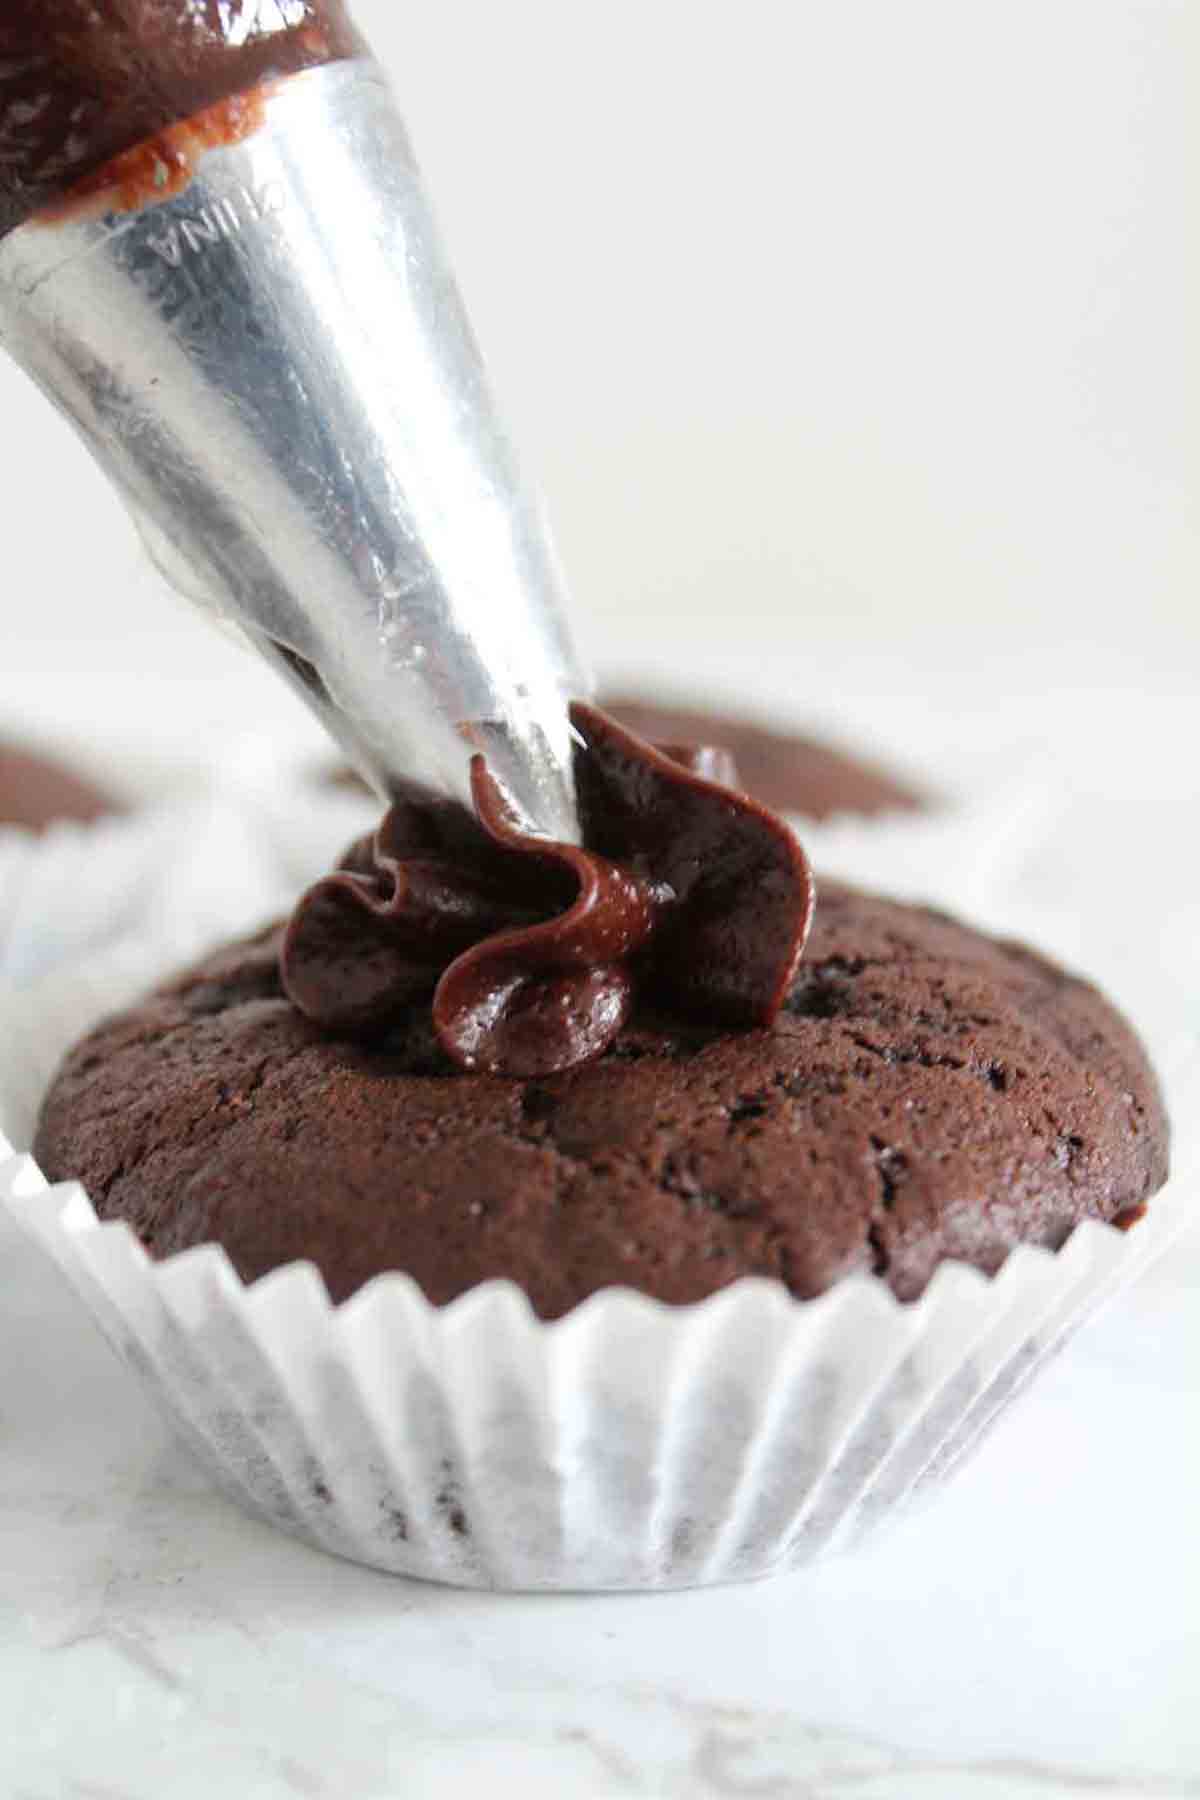 Piping Dairy Free Chocolate Buttercream Onto Eggless Cucpake